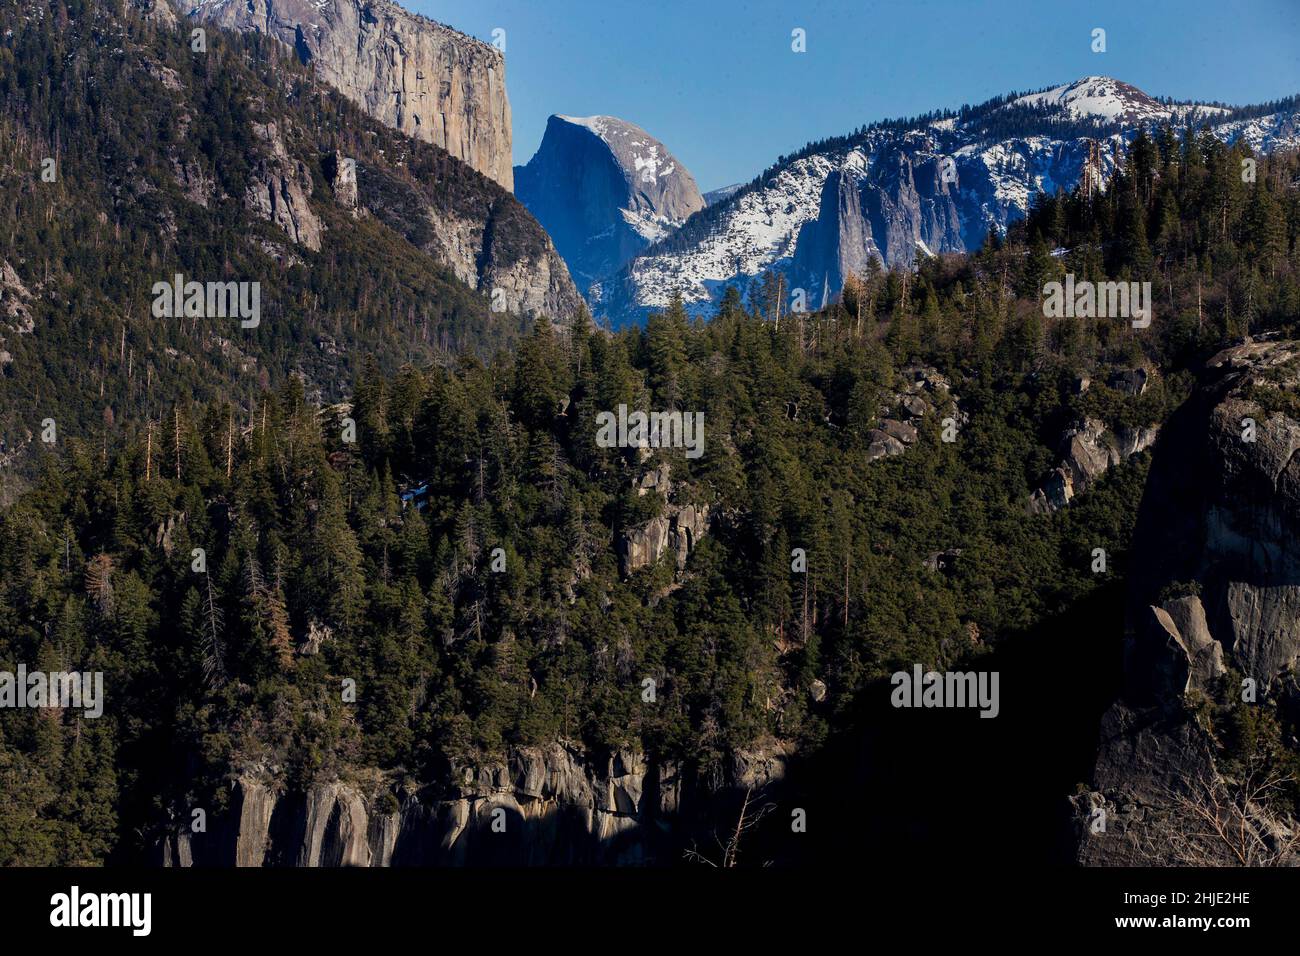 Yosemite National Park, CA, U.S.A. 28th Jan, 2022. Yosemite National Park in California, USA provides the ultimate nature experience for anyone looking to get out and experience nature. A view of Half Dome can be seen on your way into the Yosemite Valley. (Credit Image: © Marty Bicek/ZUMA Press Wire) Stock Photo